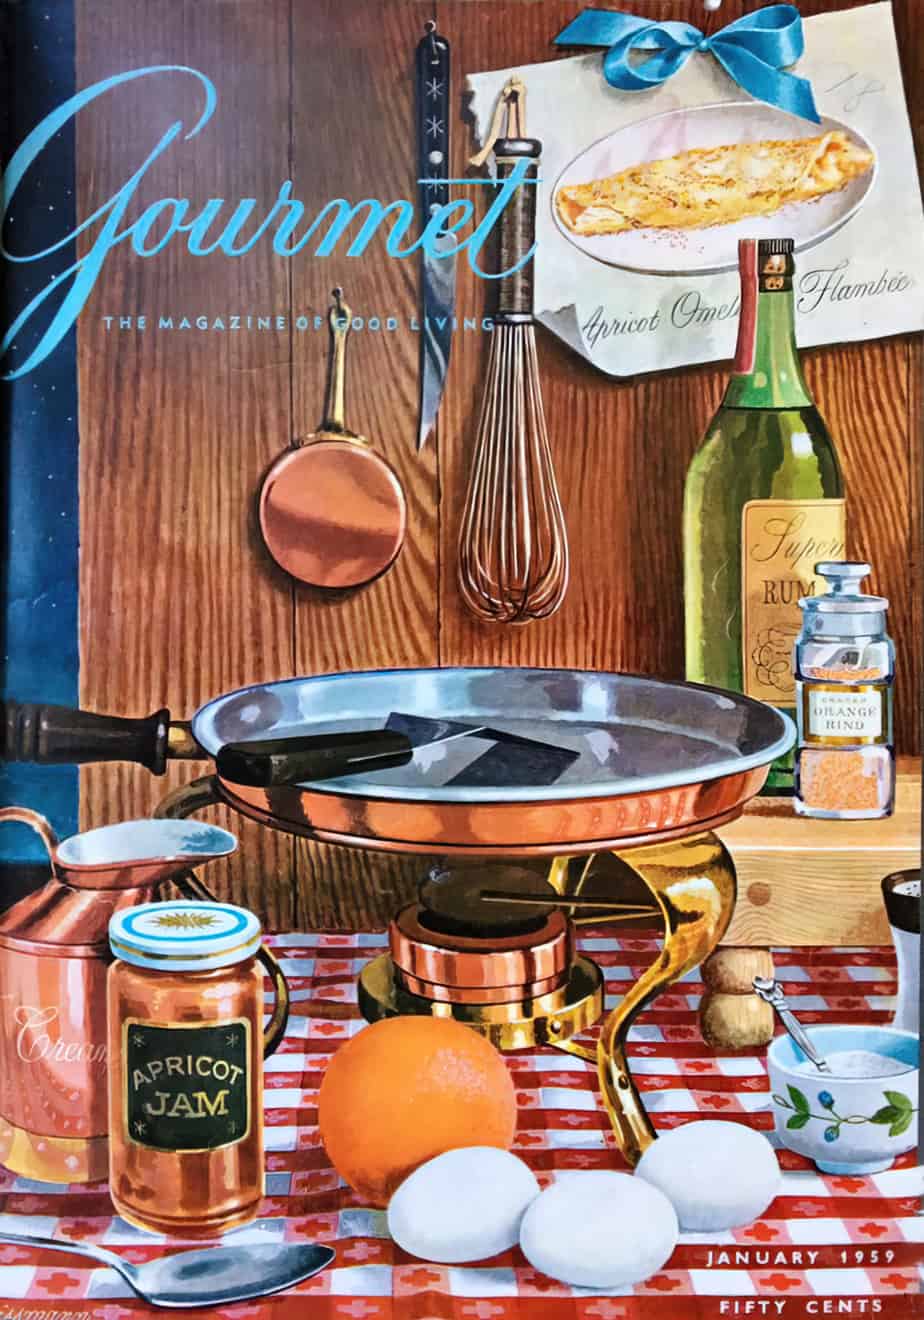 Gourmet Magazine January 1959 with Apricot Jam, Eggs, and a Shiny Pan